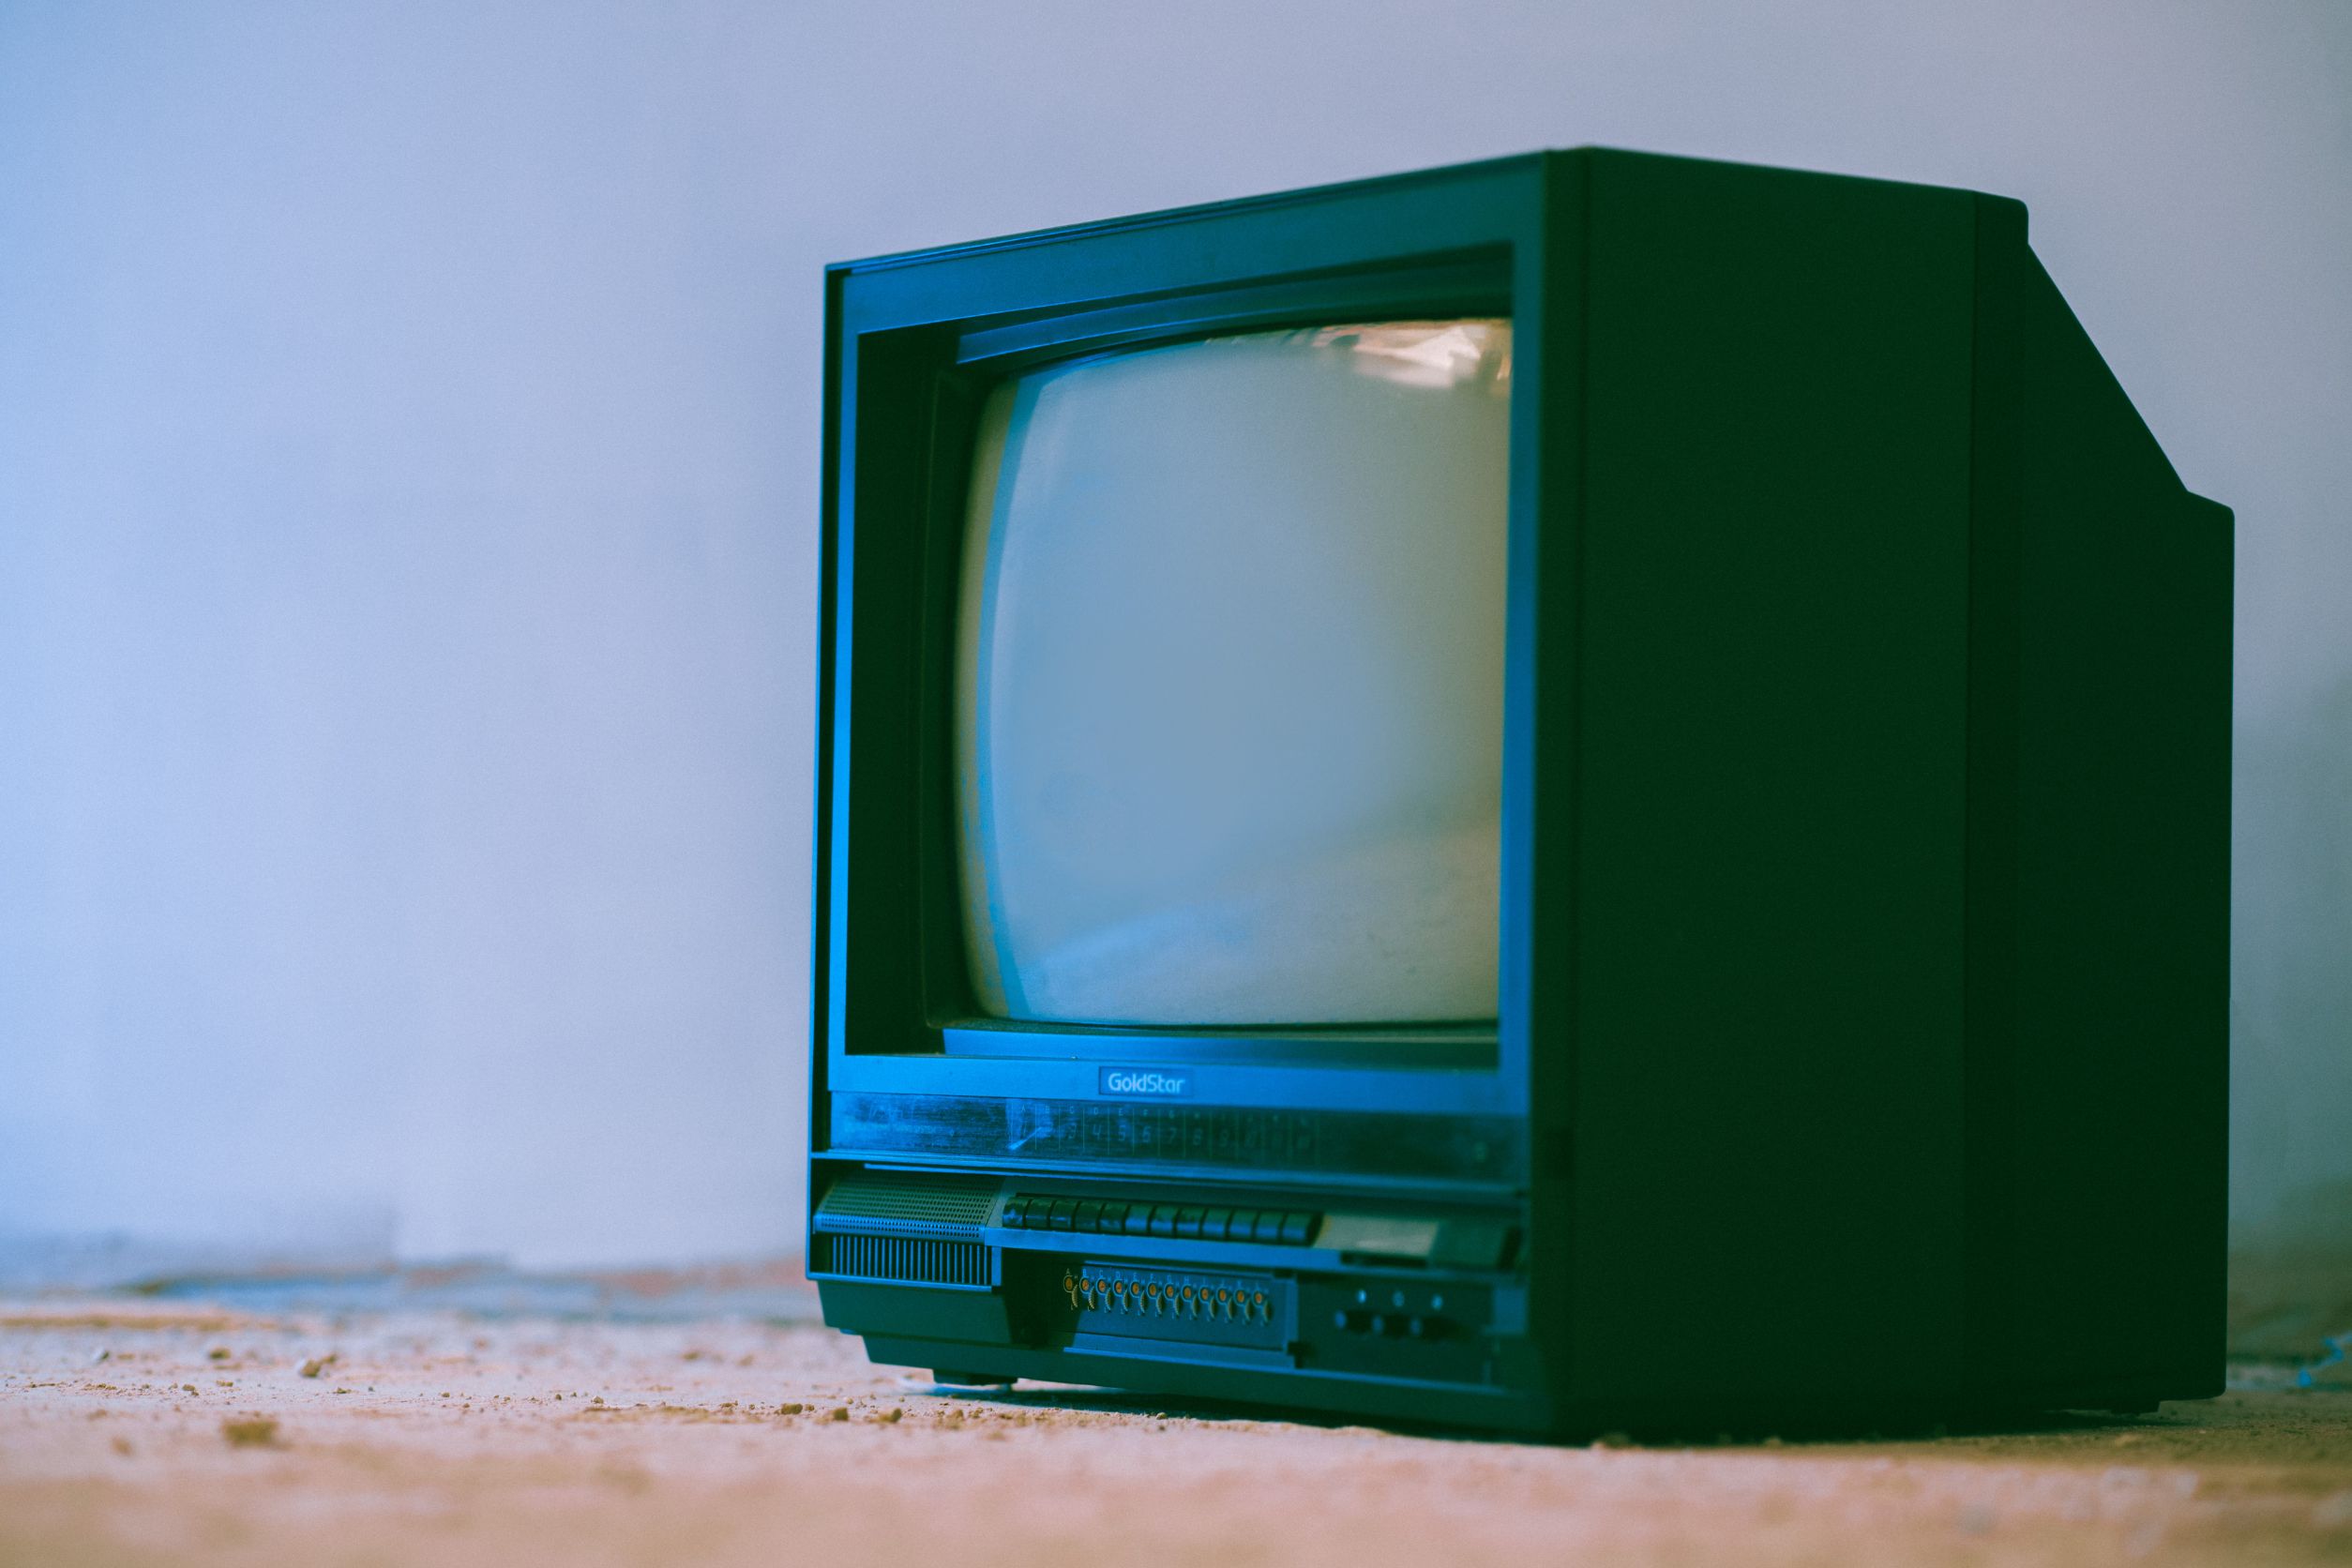 CRT Televisions